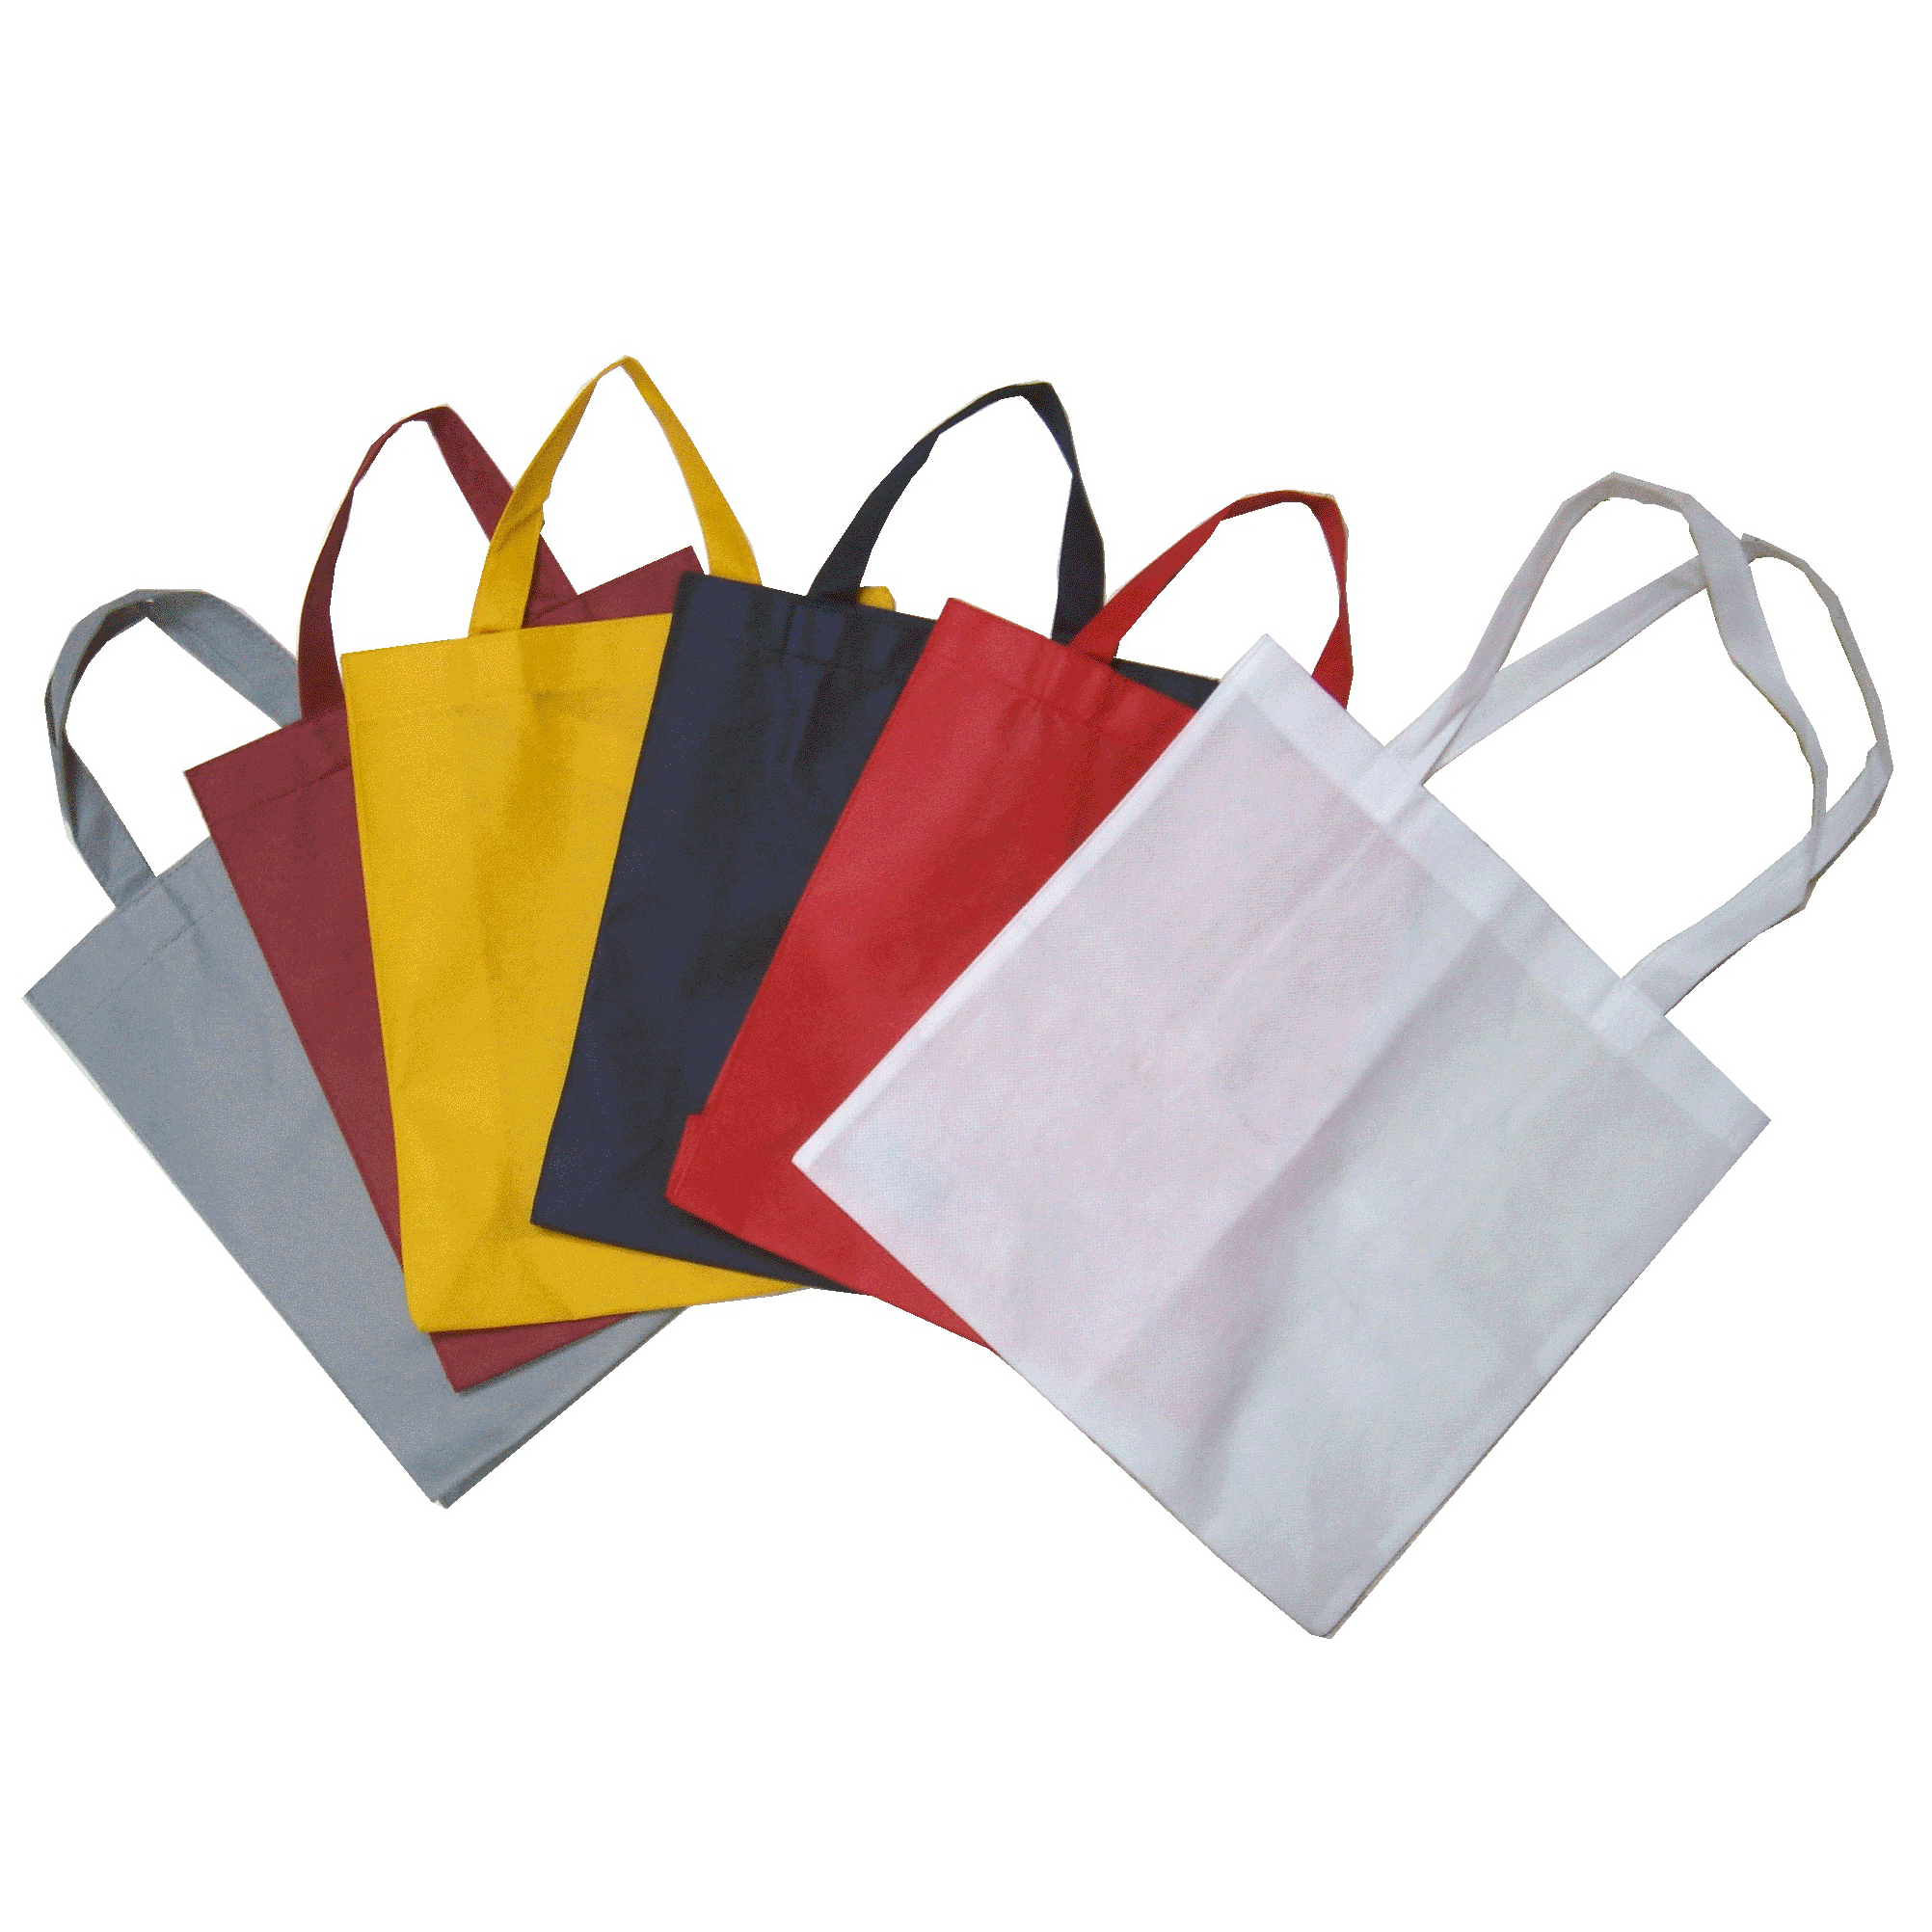 Nonwoven bags Suppliers | Nonwoven bags Manufacturers | Nonwoven bags